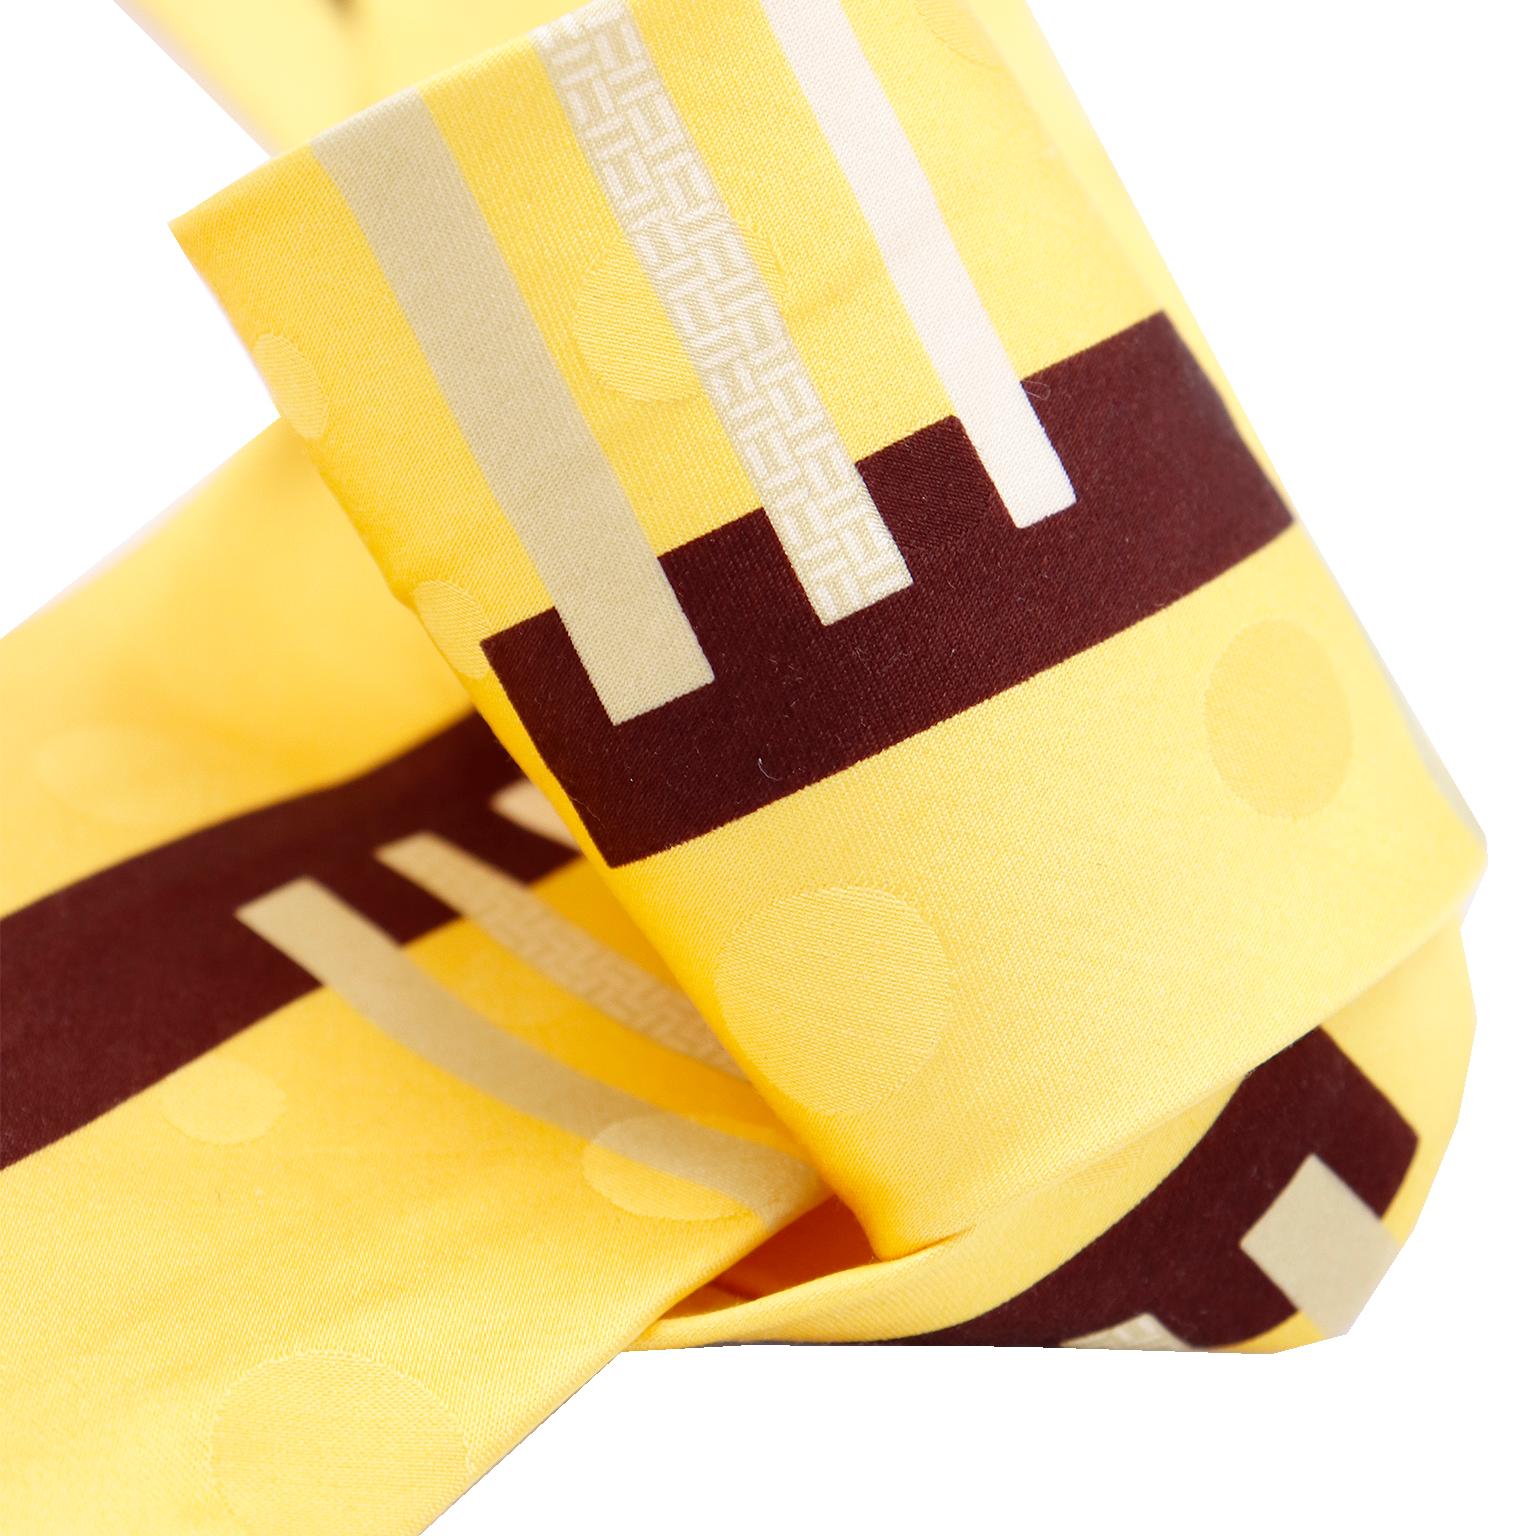 Yohji Yamamoto Costume d'Homme Vintage Tie Yellow Abstract Silk Necktie In Excellent Condition For Sale In Portland, OR